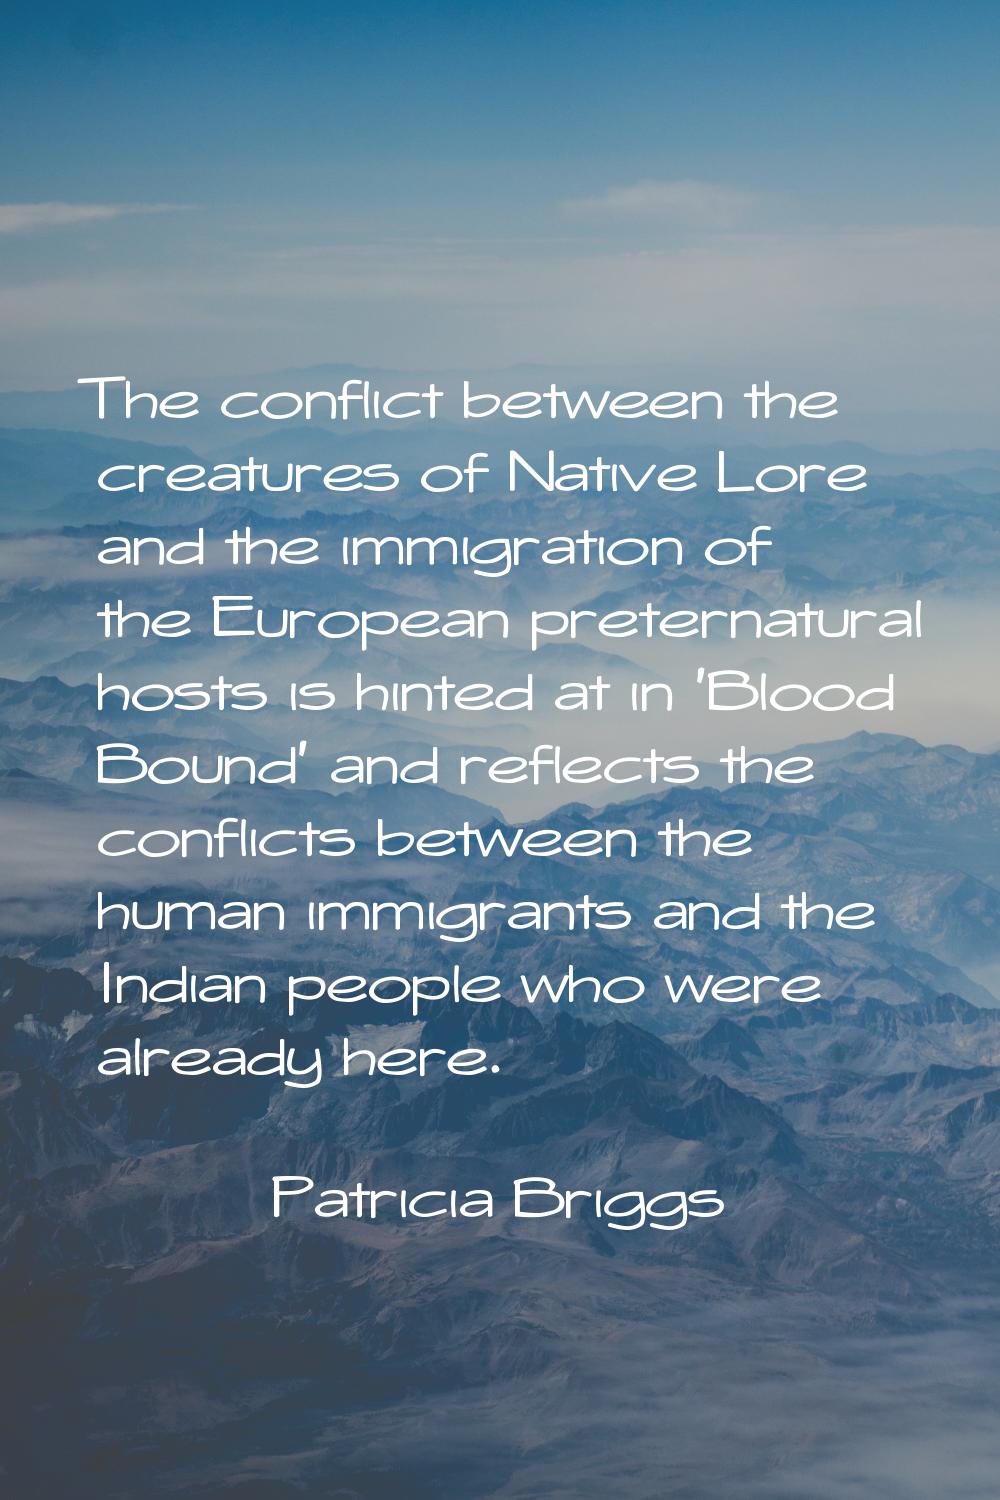 The conflict between the creatures of Native Lore and the immigration of the European preternatural